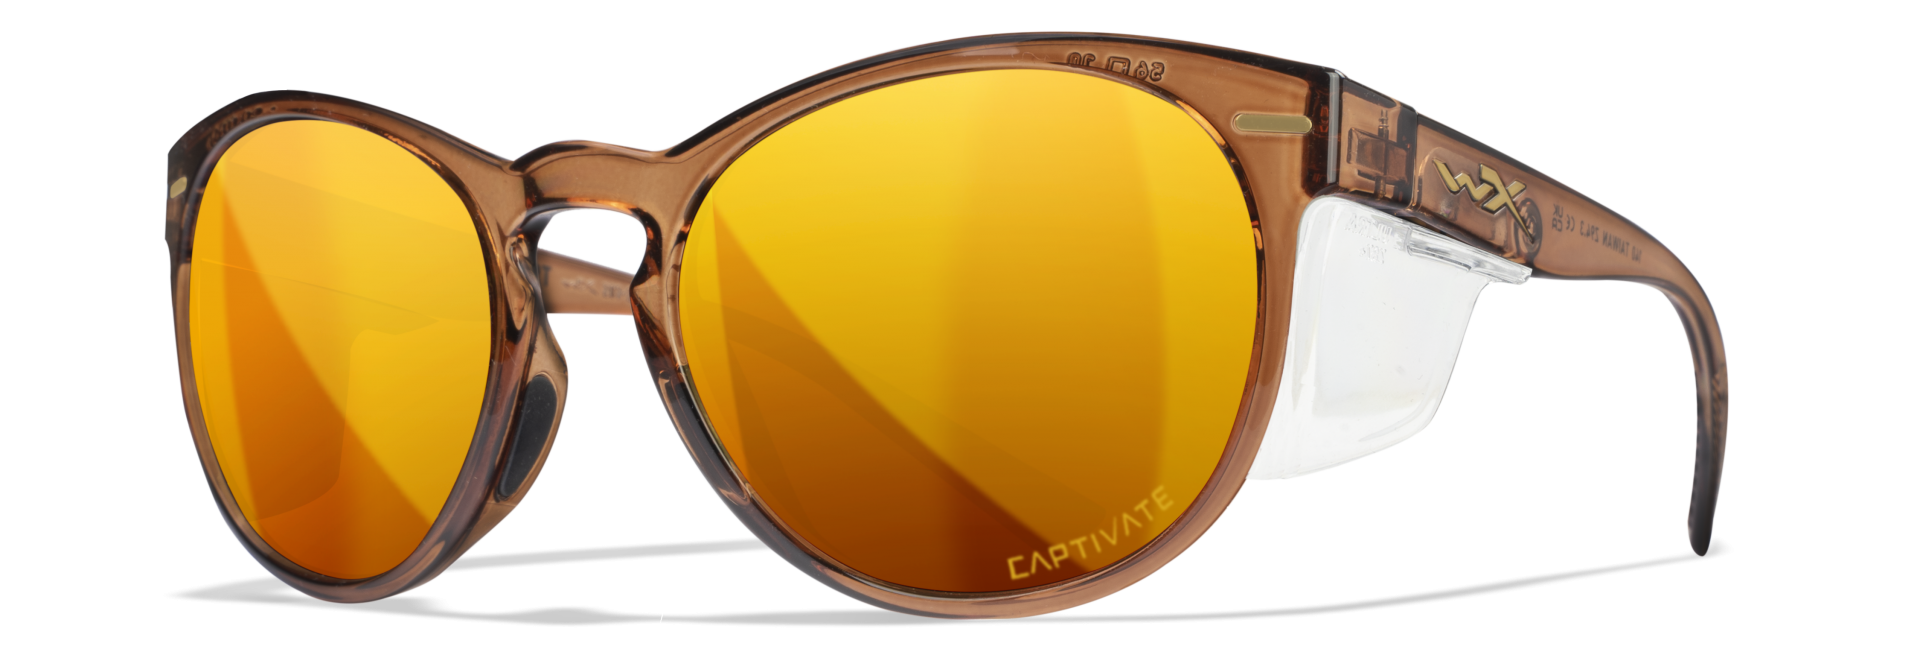 WileyX COVERT Captivate Polarized Bronze Mirror Copper Crystal Rootbeer Frame